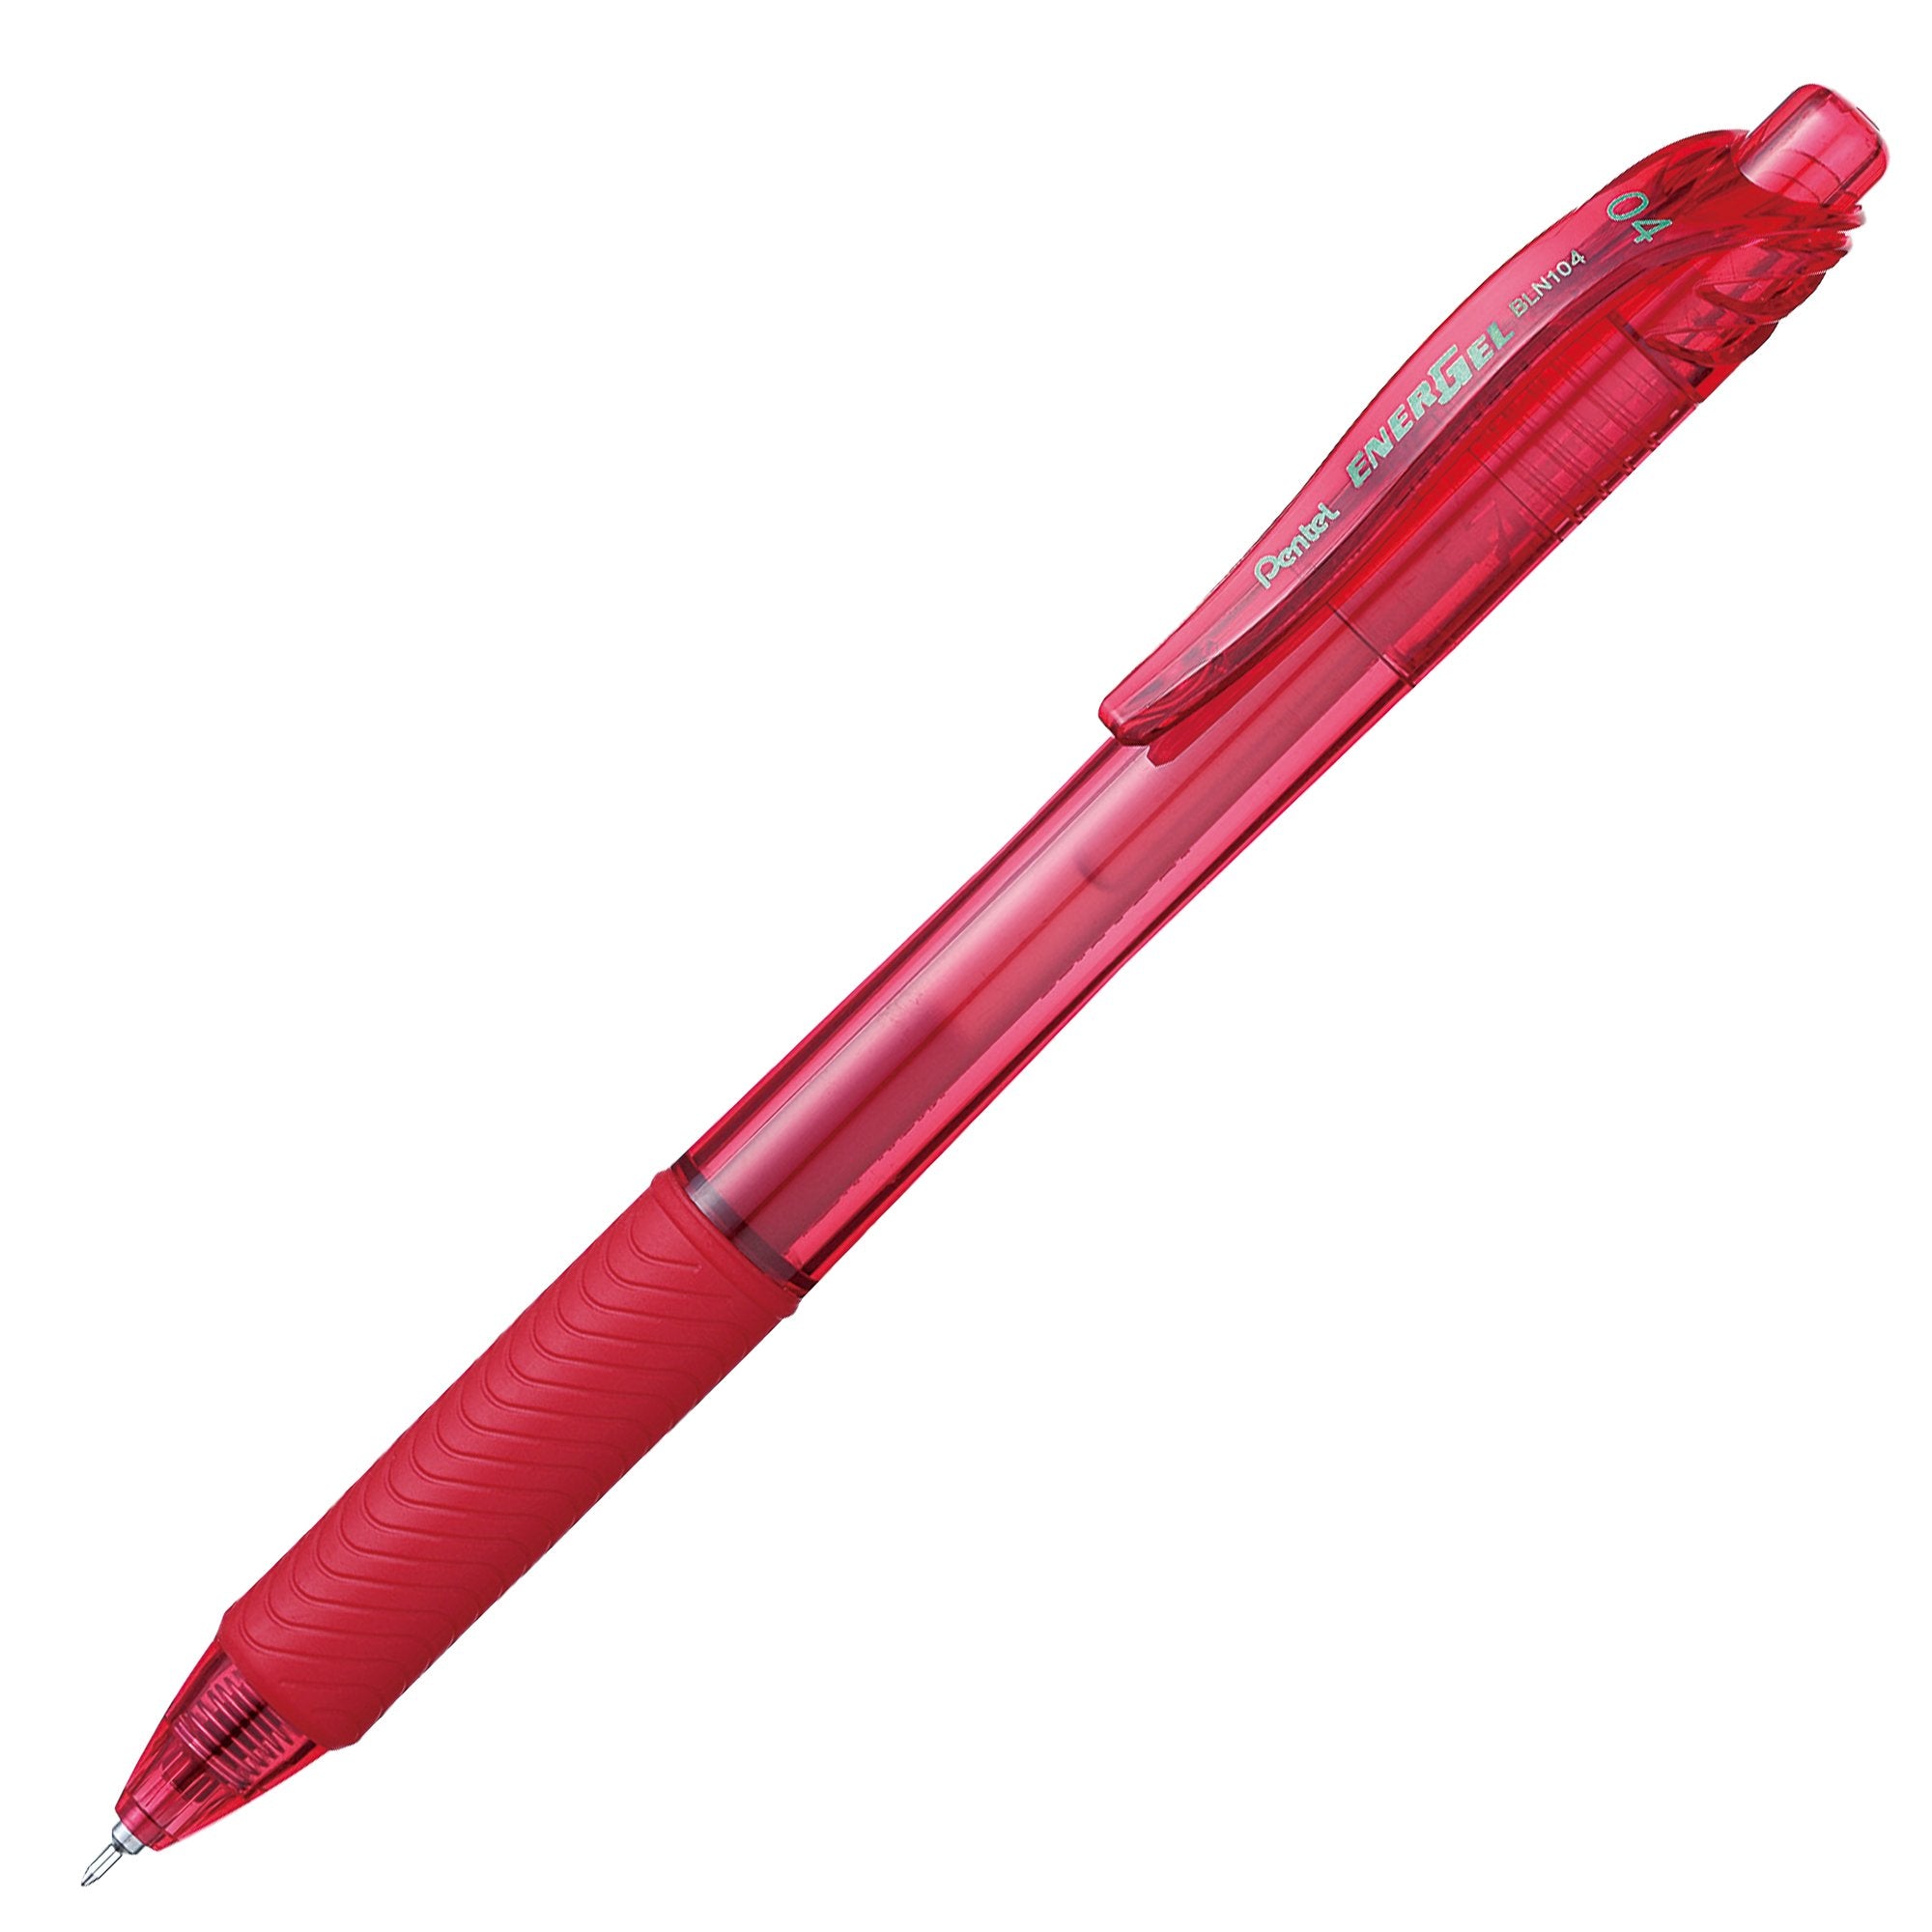 pentel-roller-scatto-energel-x-bln-104-rosso-0-4mm